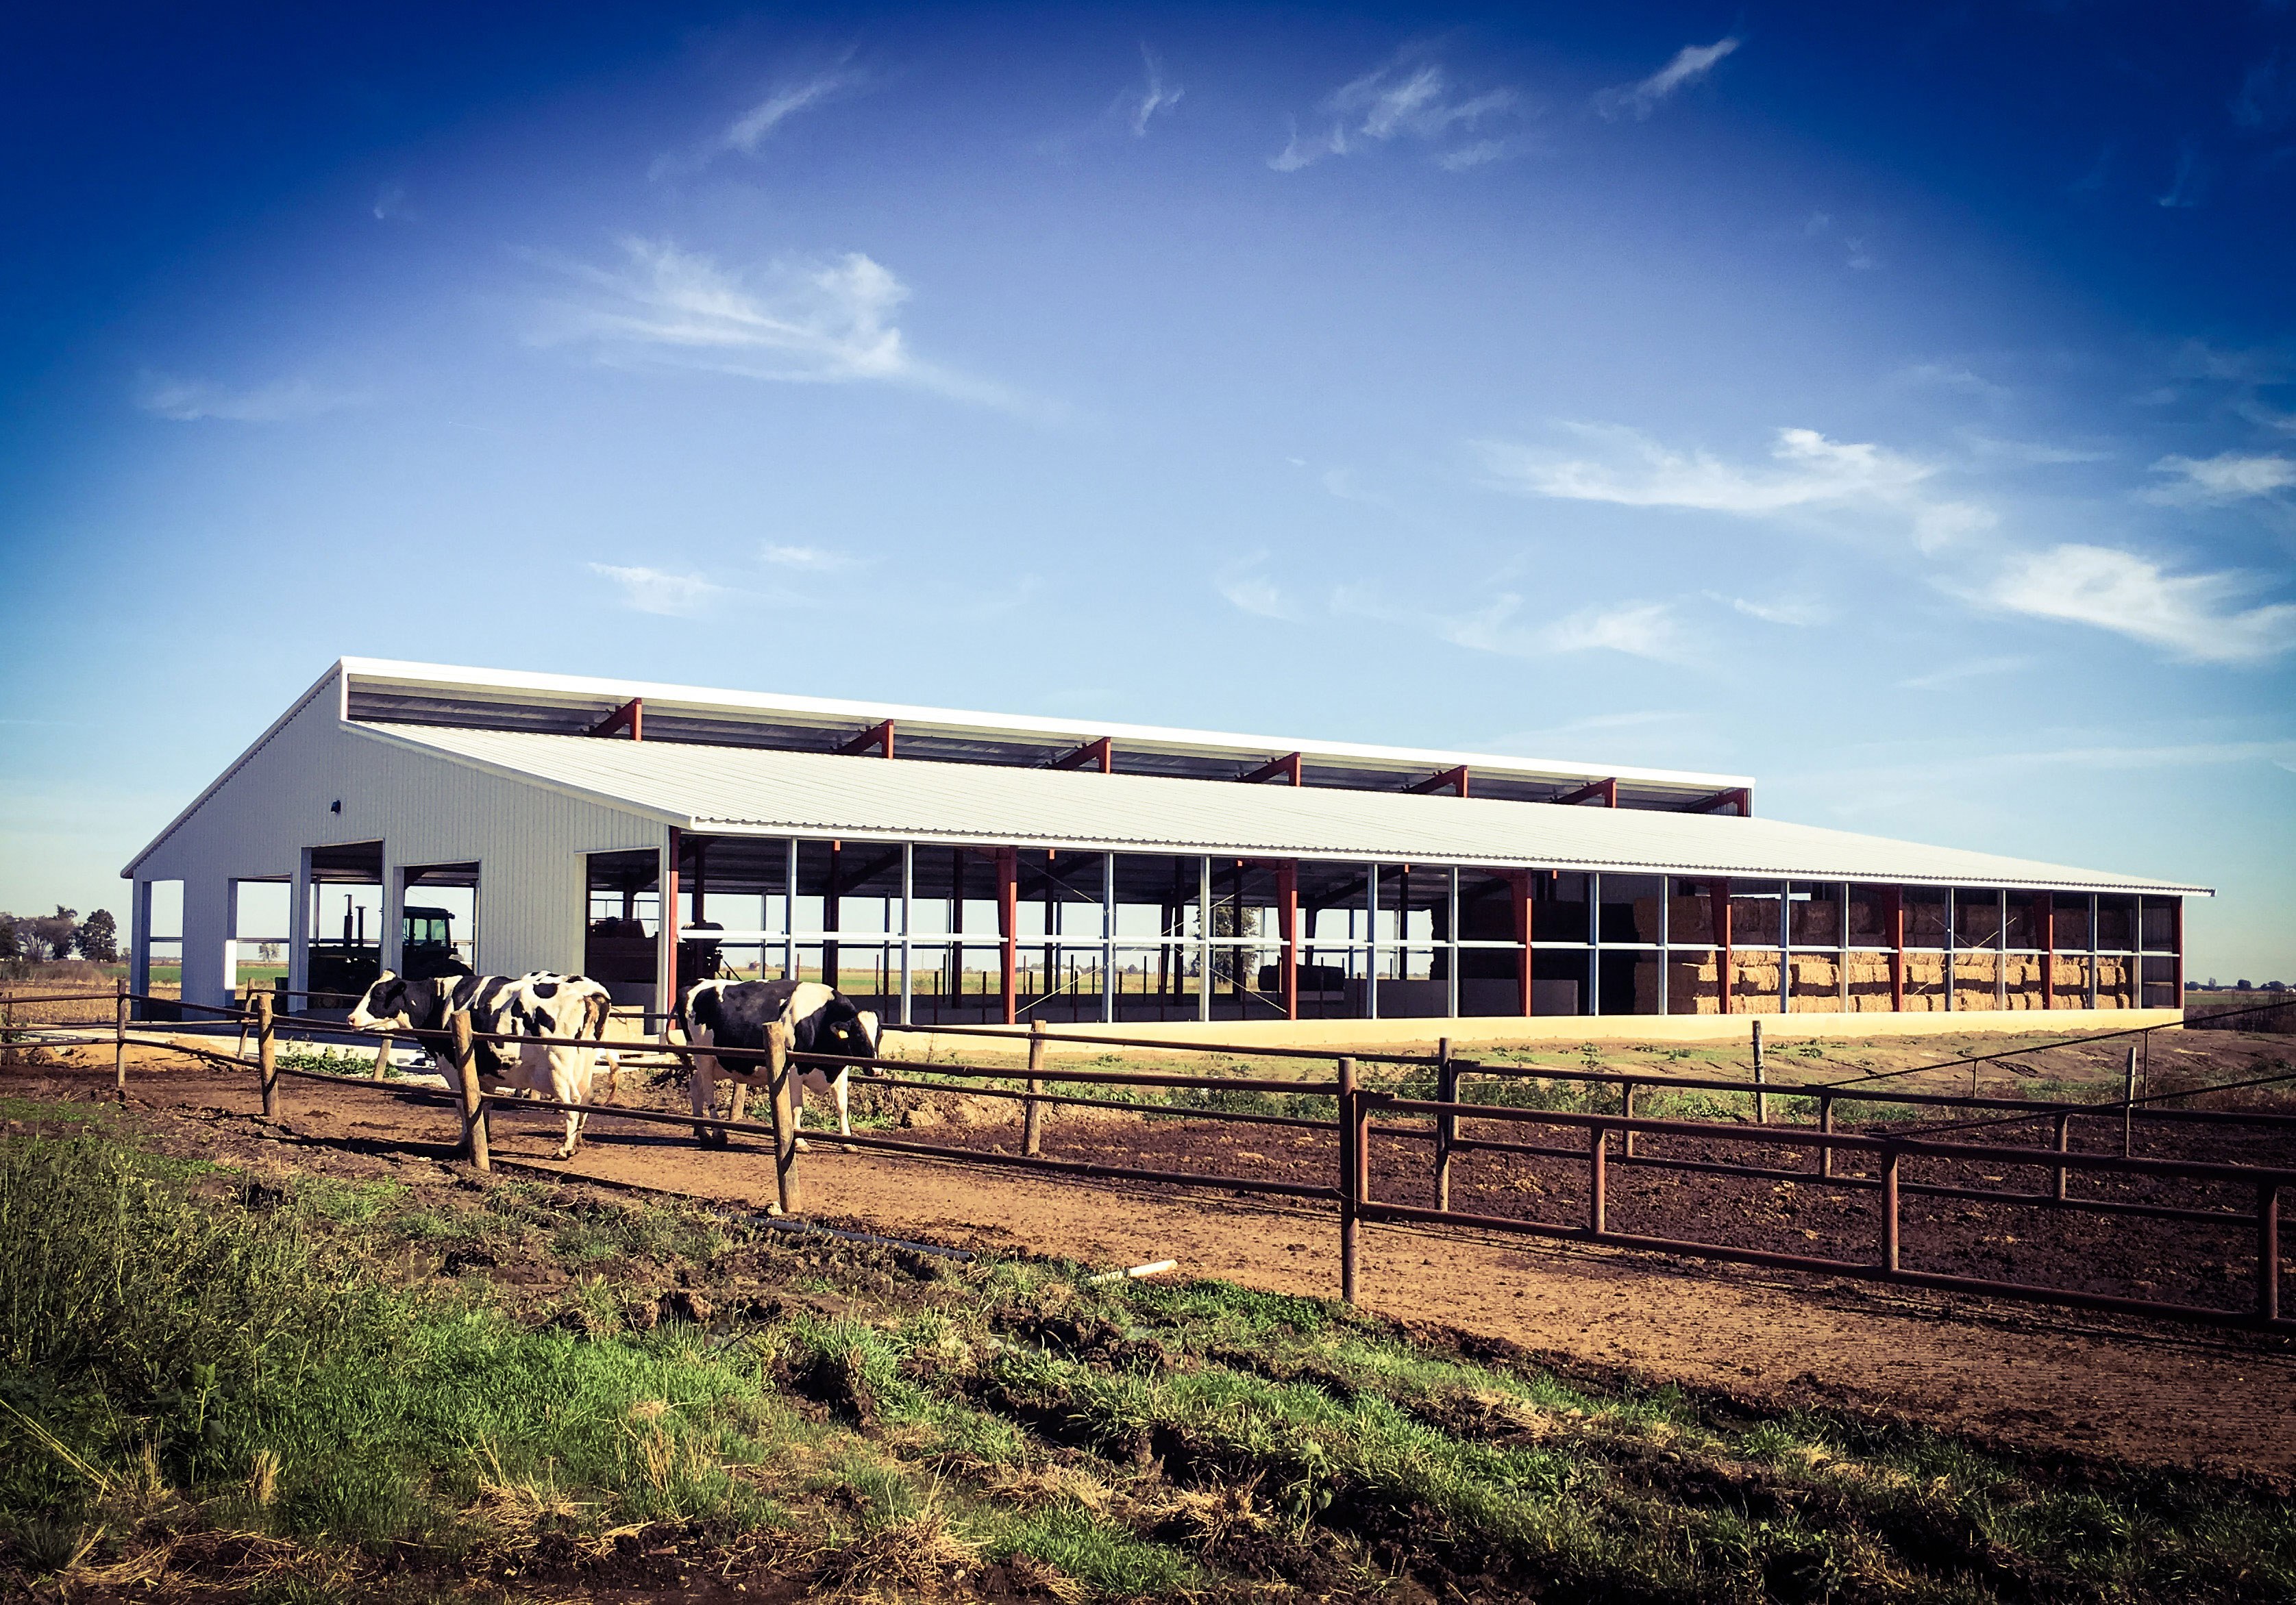 Cattle Barn projects